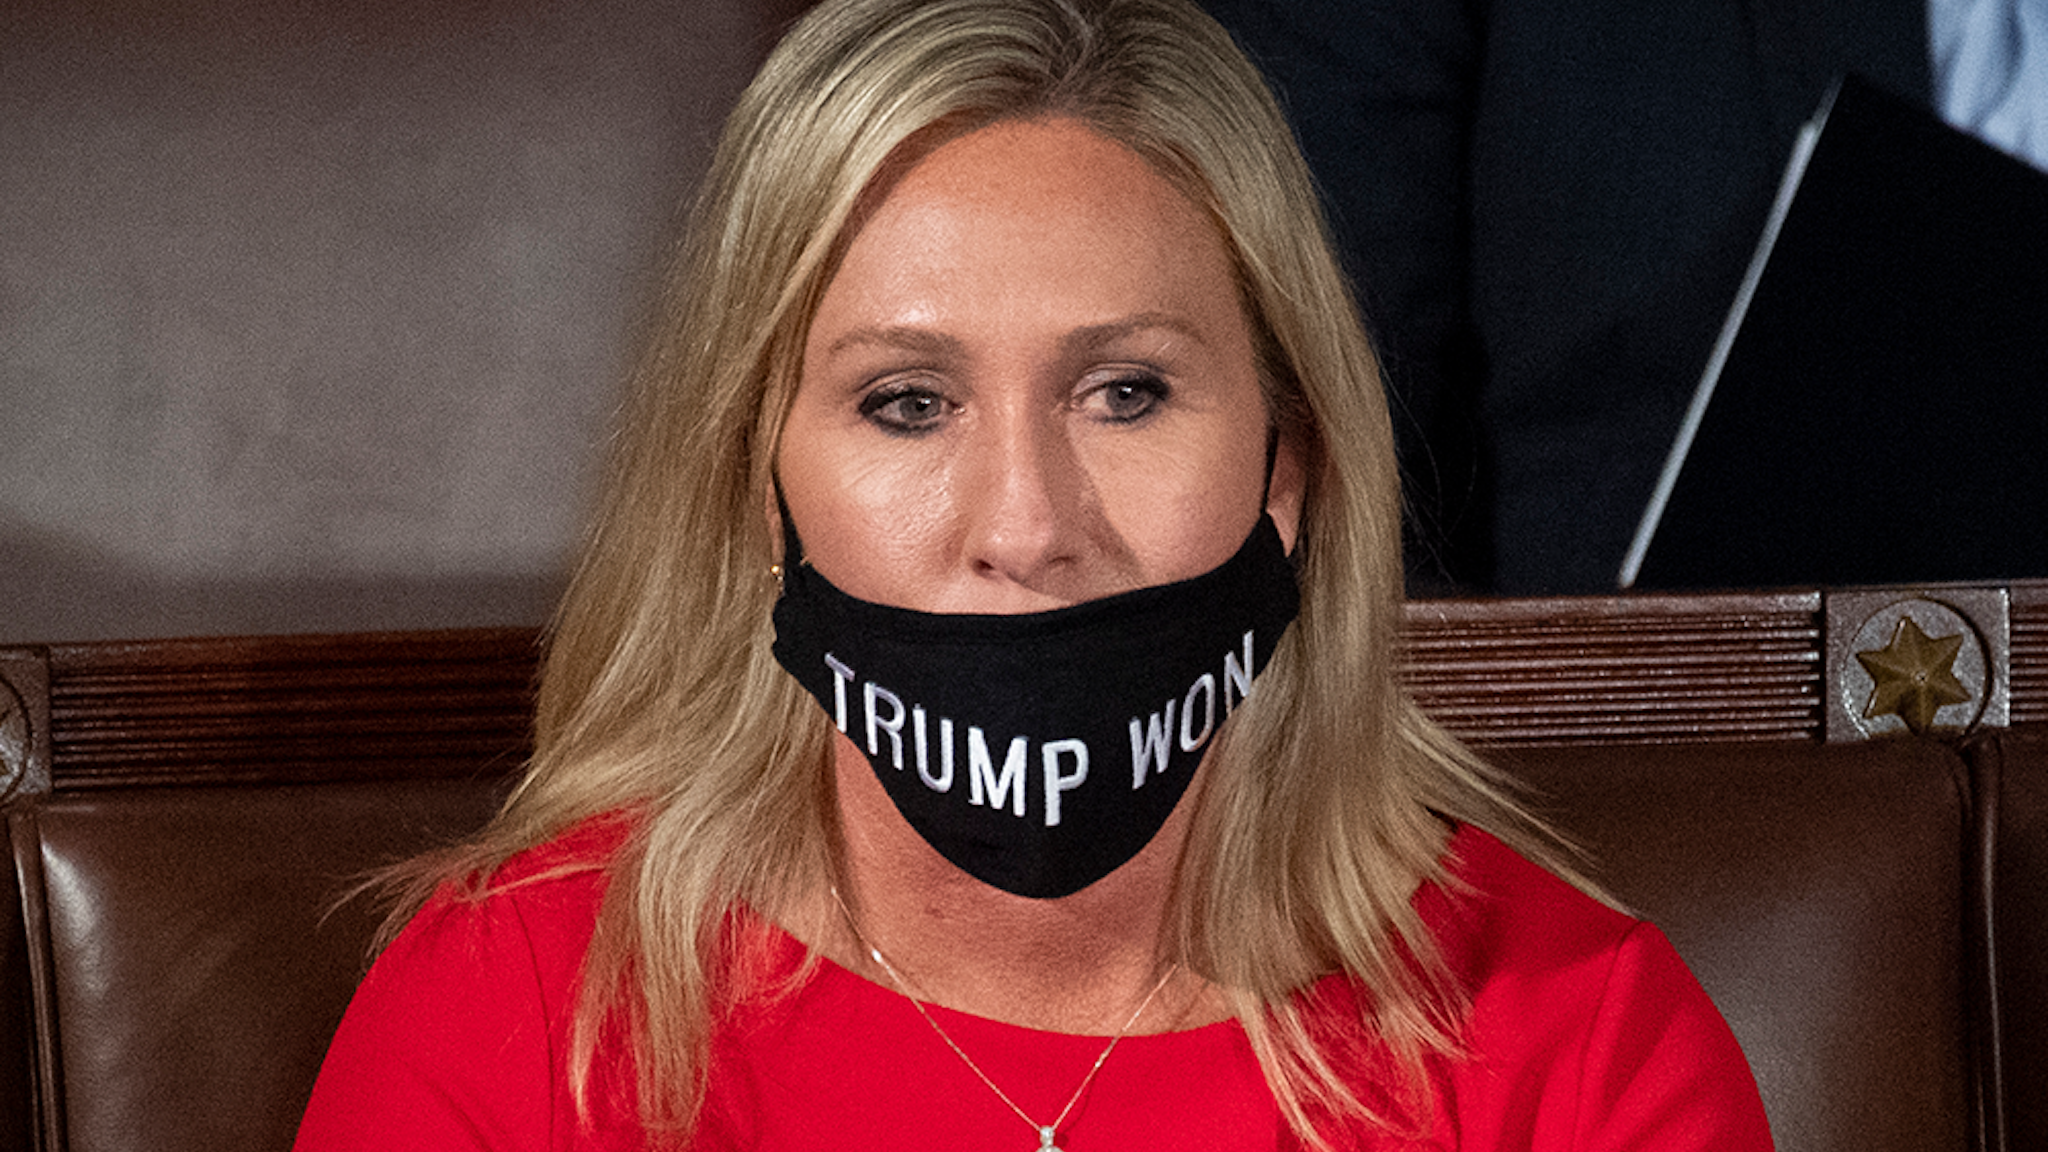 UNITED STATES - January 3: Rep.-elect Marjorie Taylor Greene, R-Ga., wears a Trump Won mask during the first session of the 117th Congress in the House Chamber as members of the 117th Congress are sworn in on Sunday, Jan. 3, 2021.